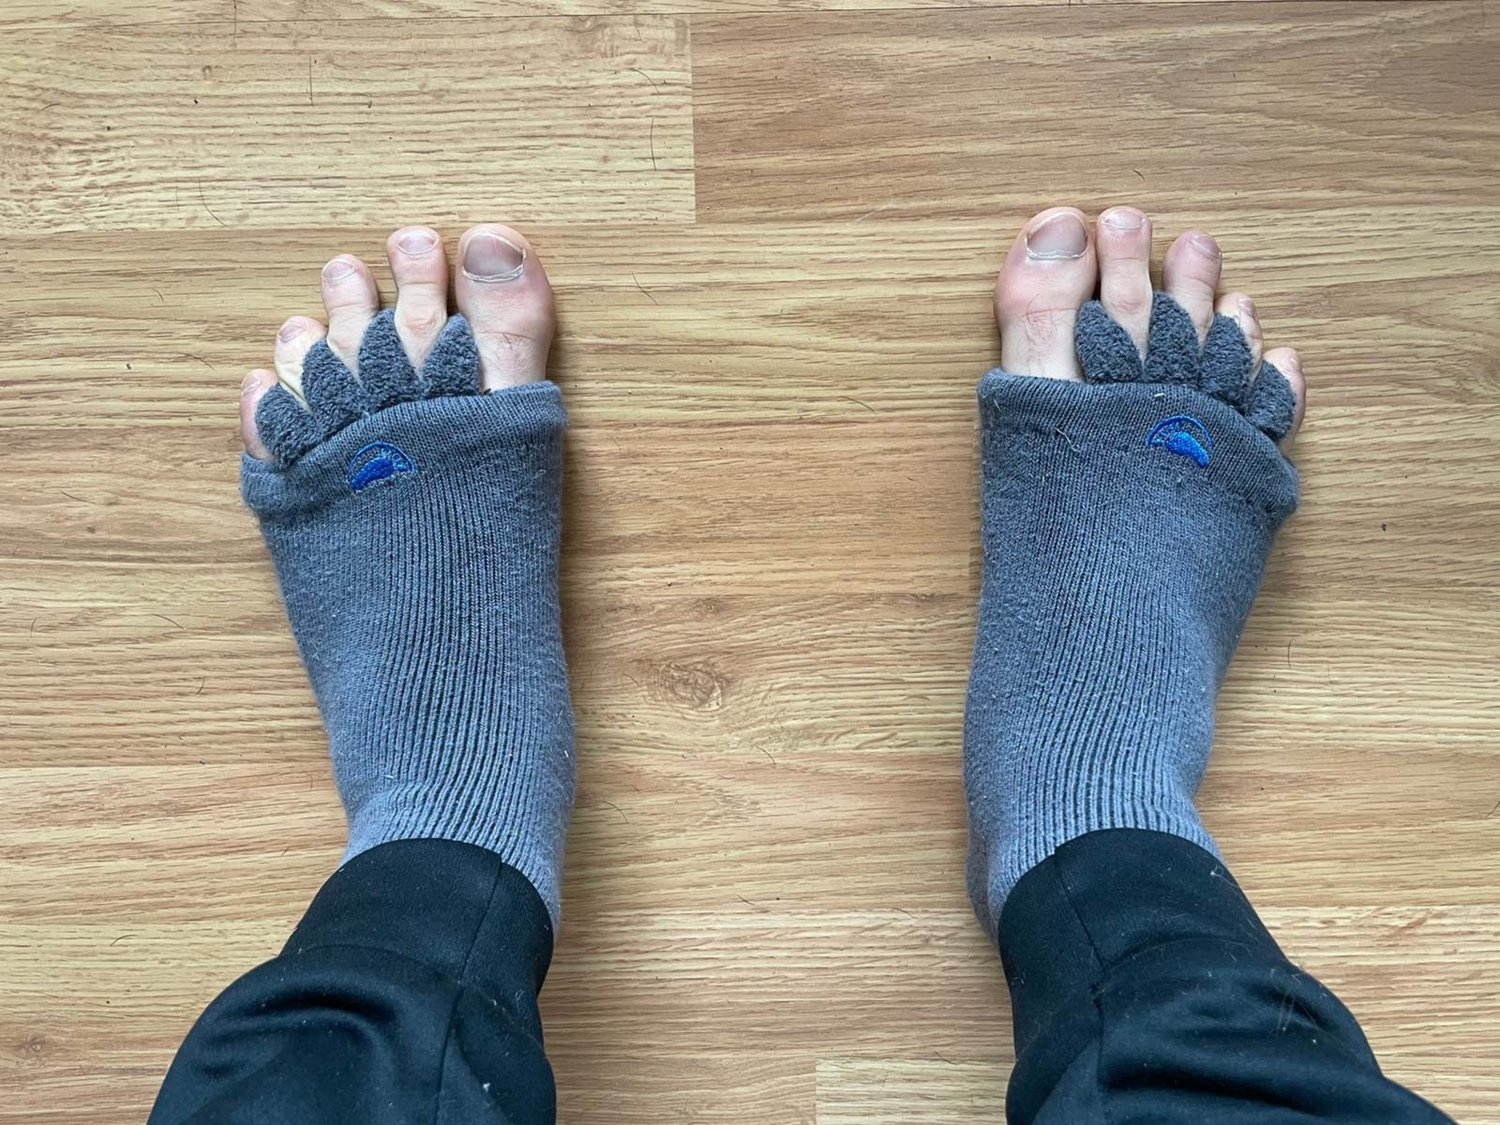 Why Men Should Wear Toe Socks Or Toe Spacers Too! — Do It At Your Desk